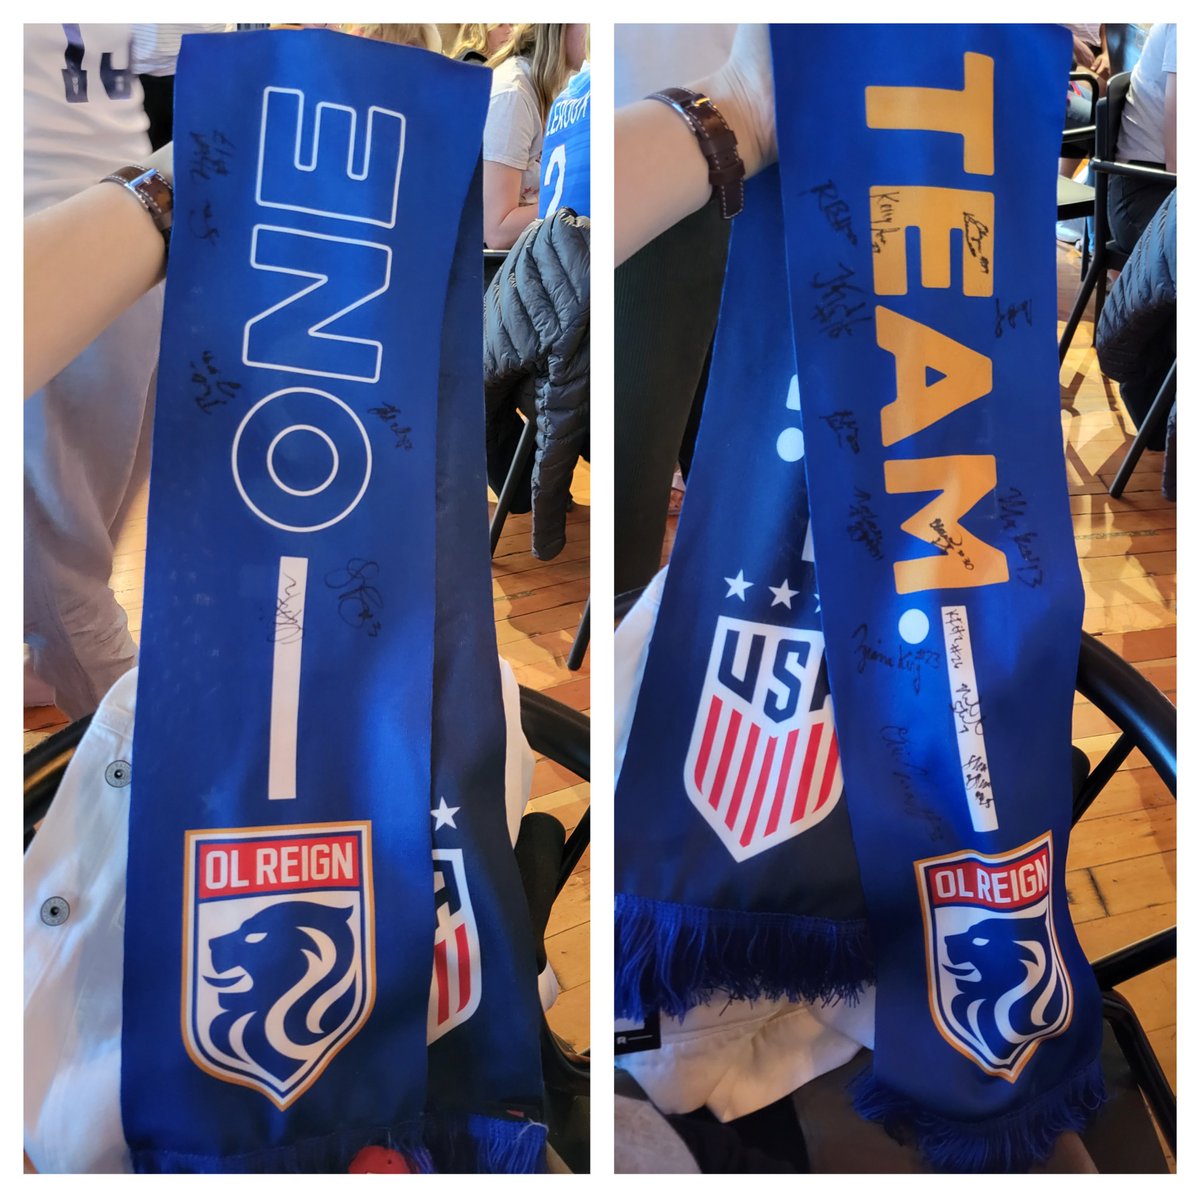 My scarf signed by OL Reign players! At Rough & Tumble cheering on #USWNT during #USANED #FIFAWWC